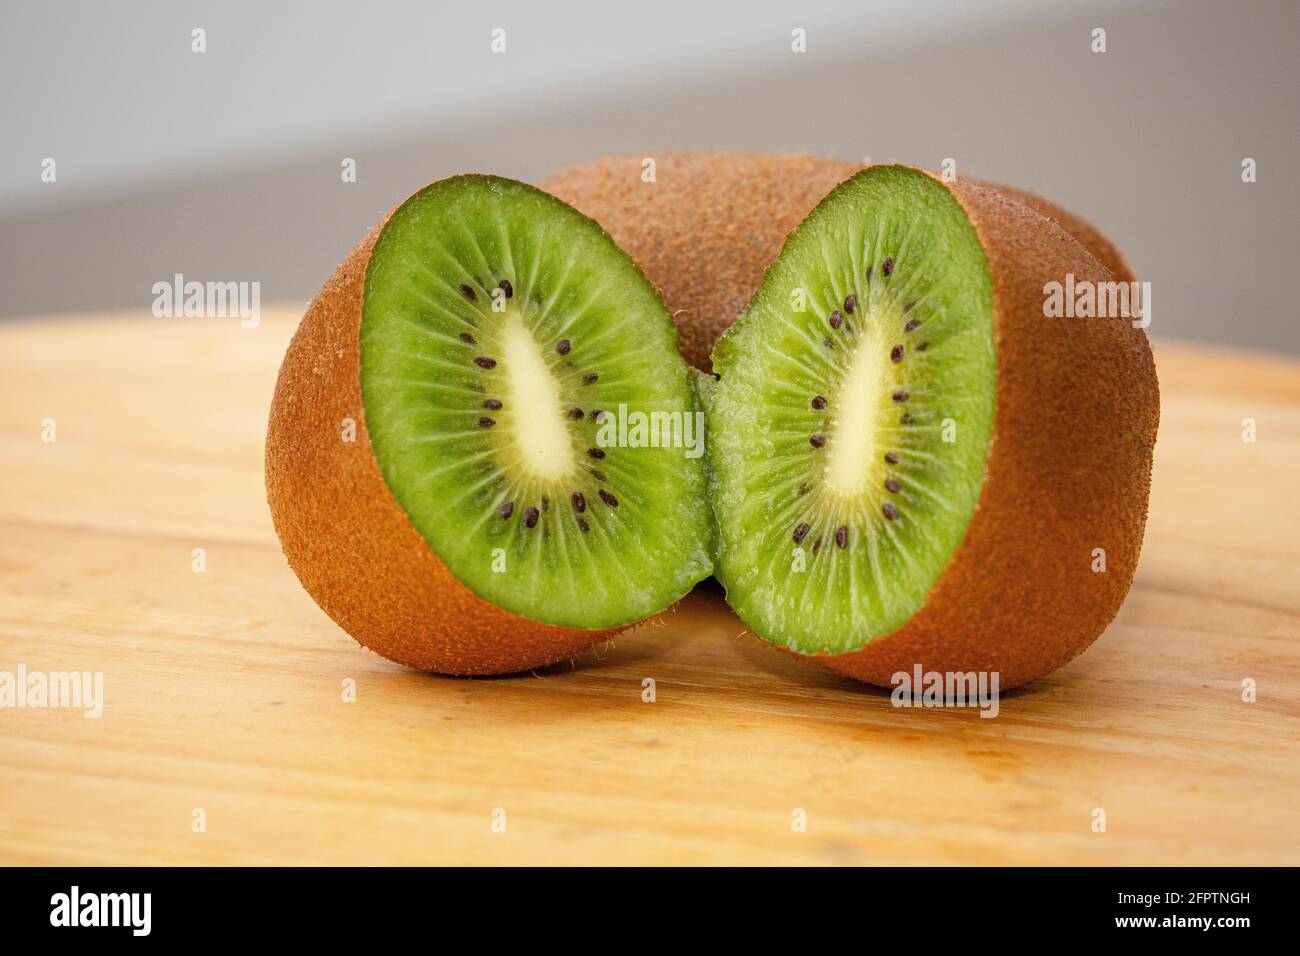 Ripe brown sliced kiwi on table ready for morning vitamin. Stock Photo